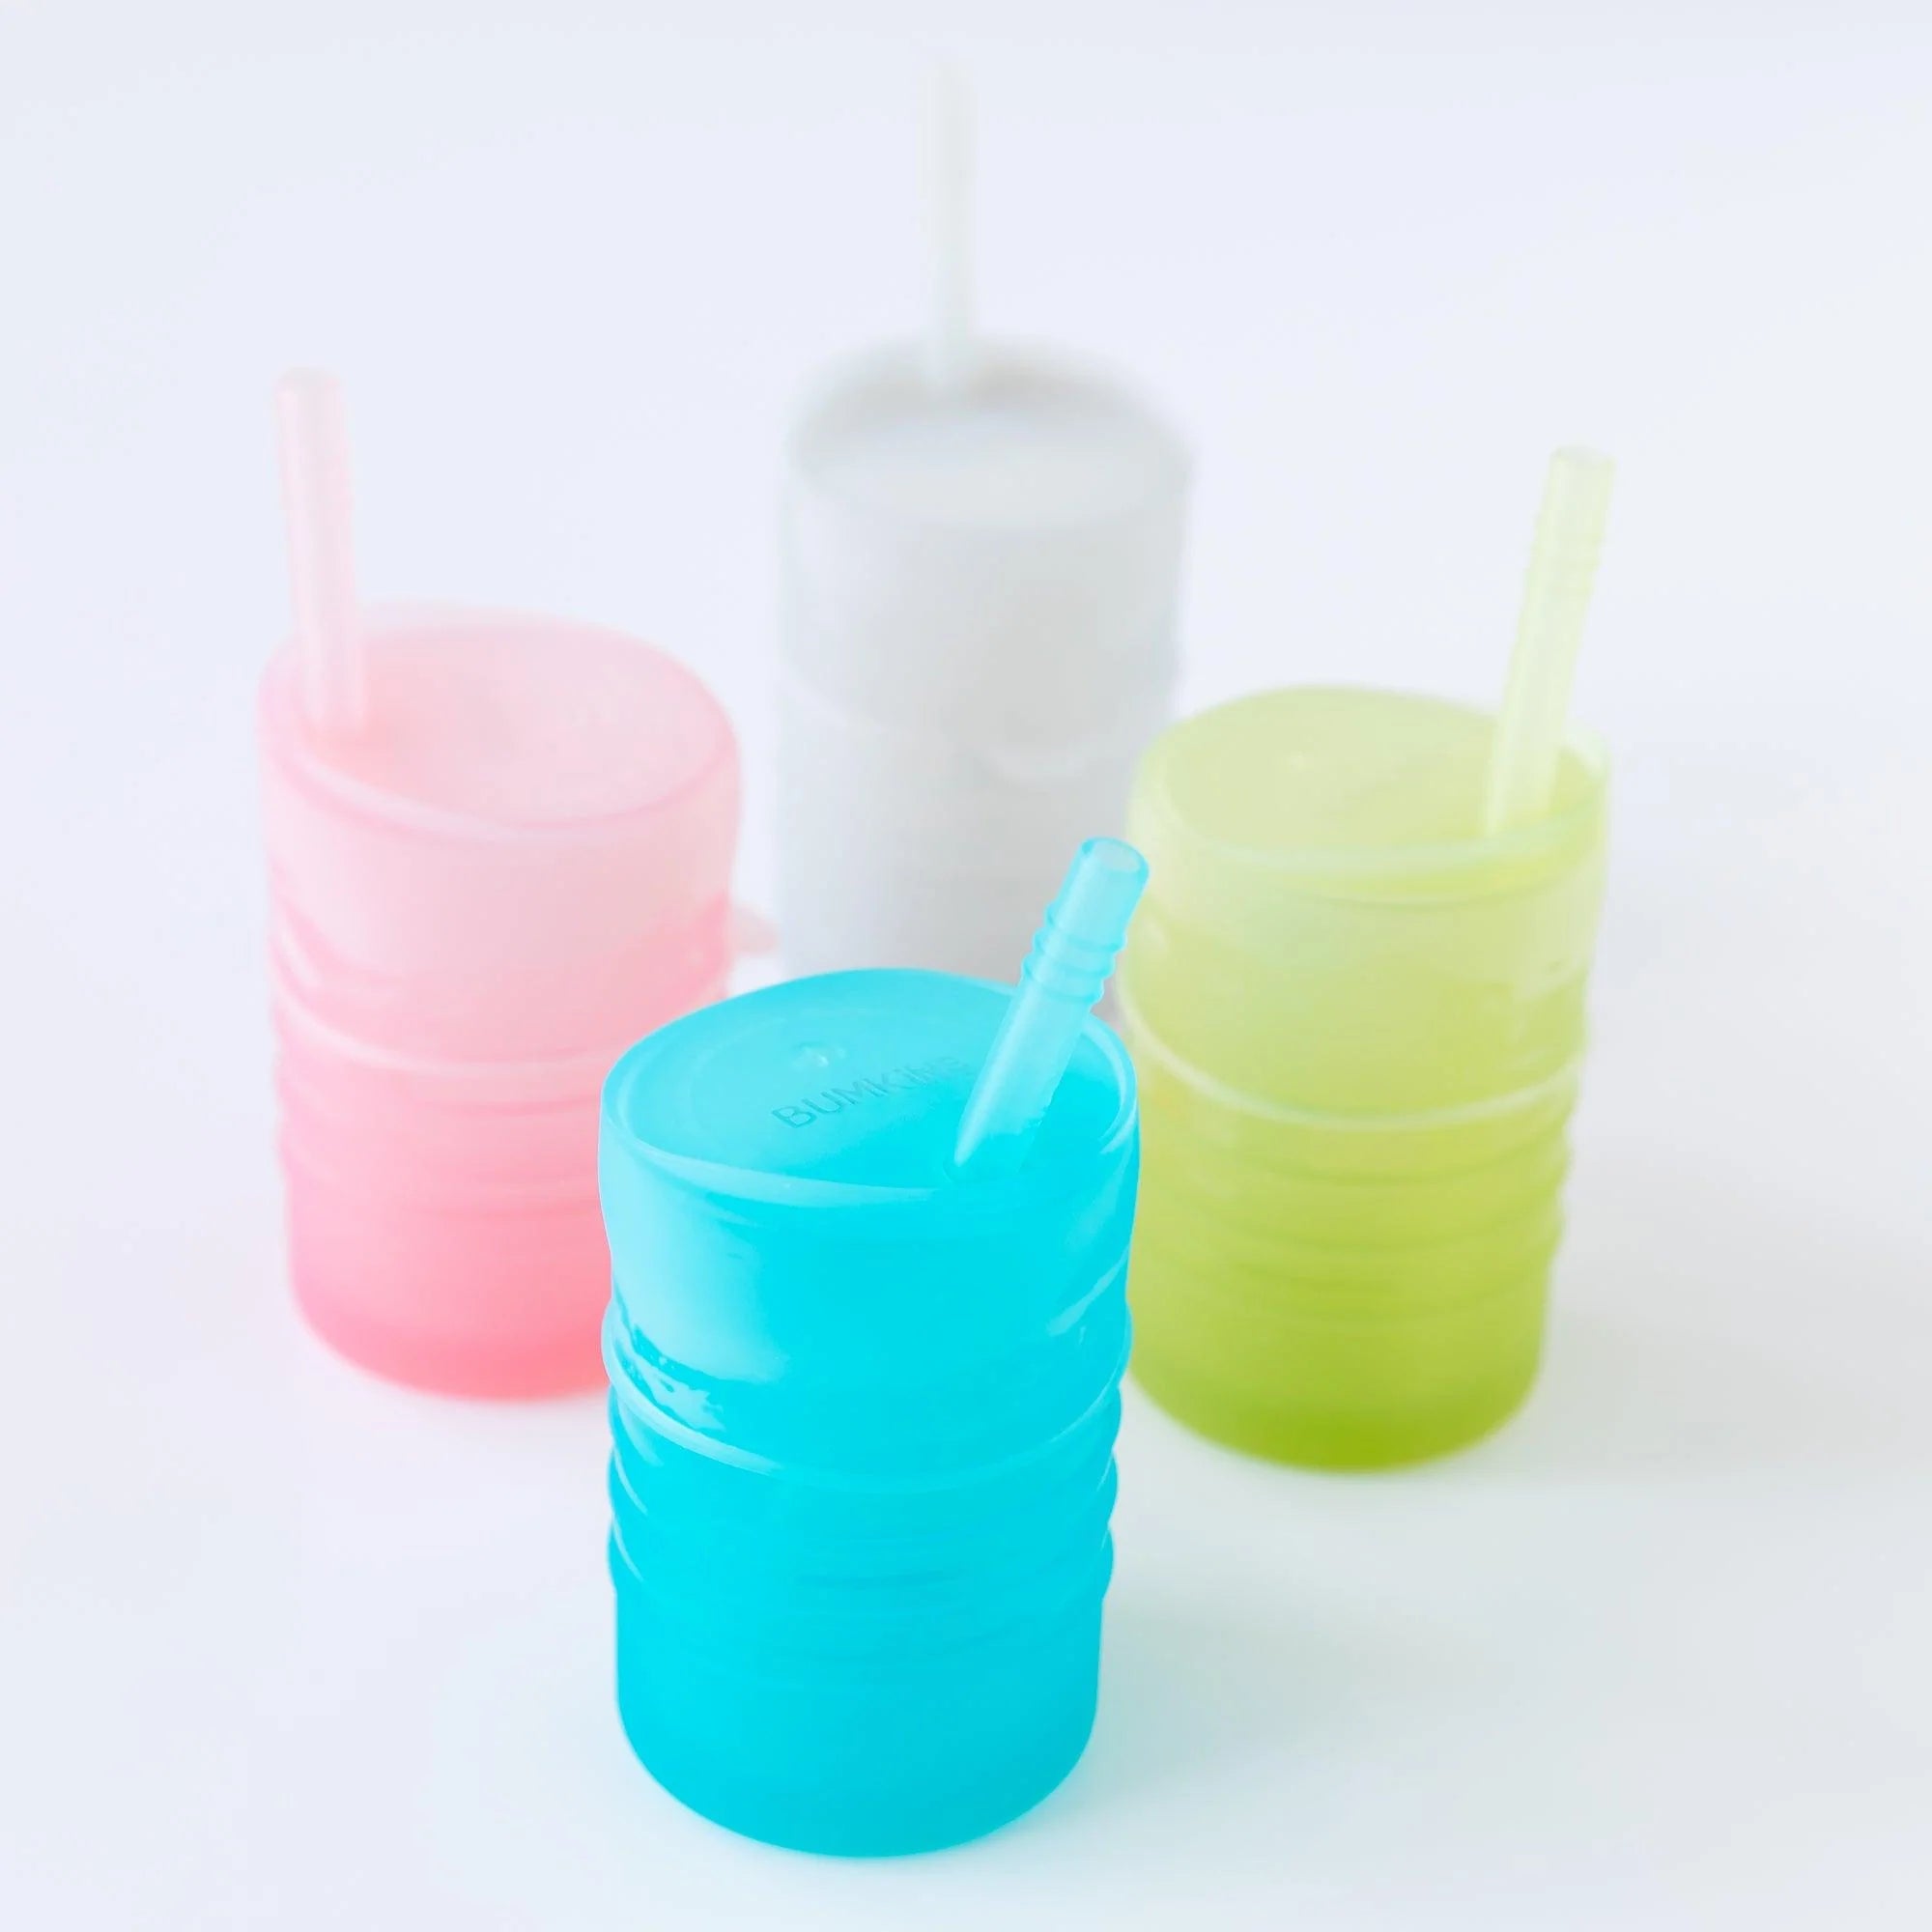 Bumkins Baby Boys and Girls Spill-Resistant Silicone Cup, Straw Lid Set